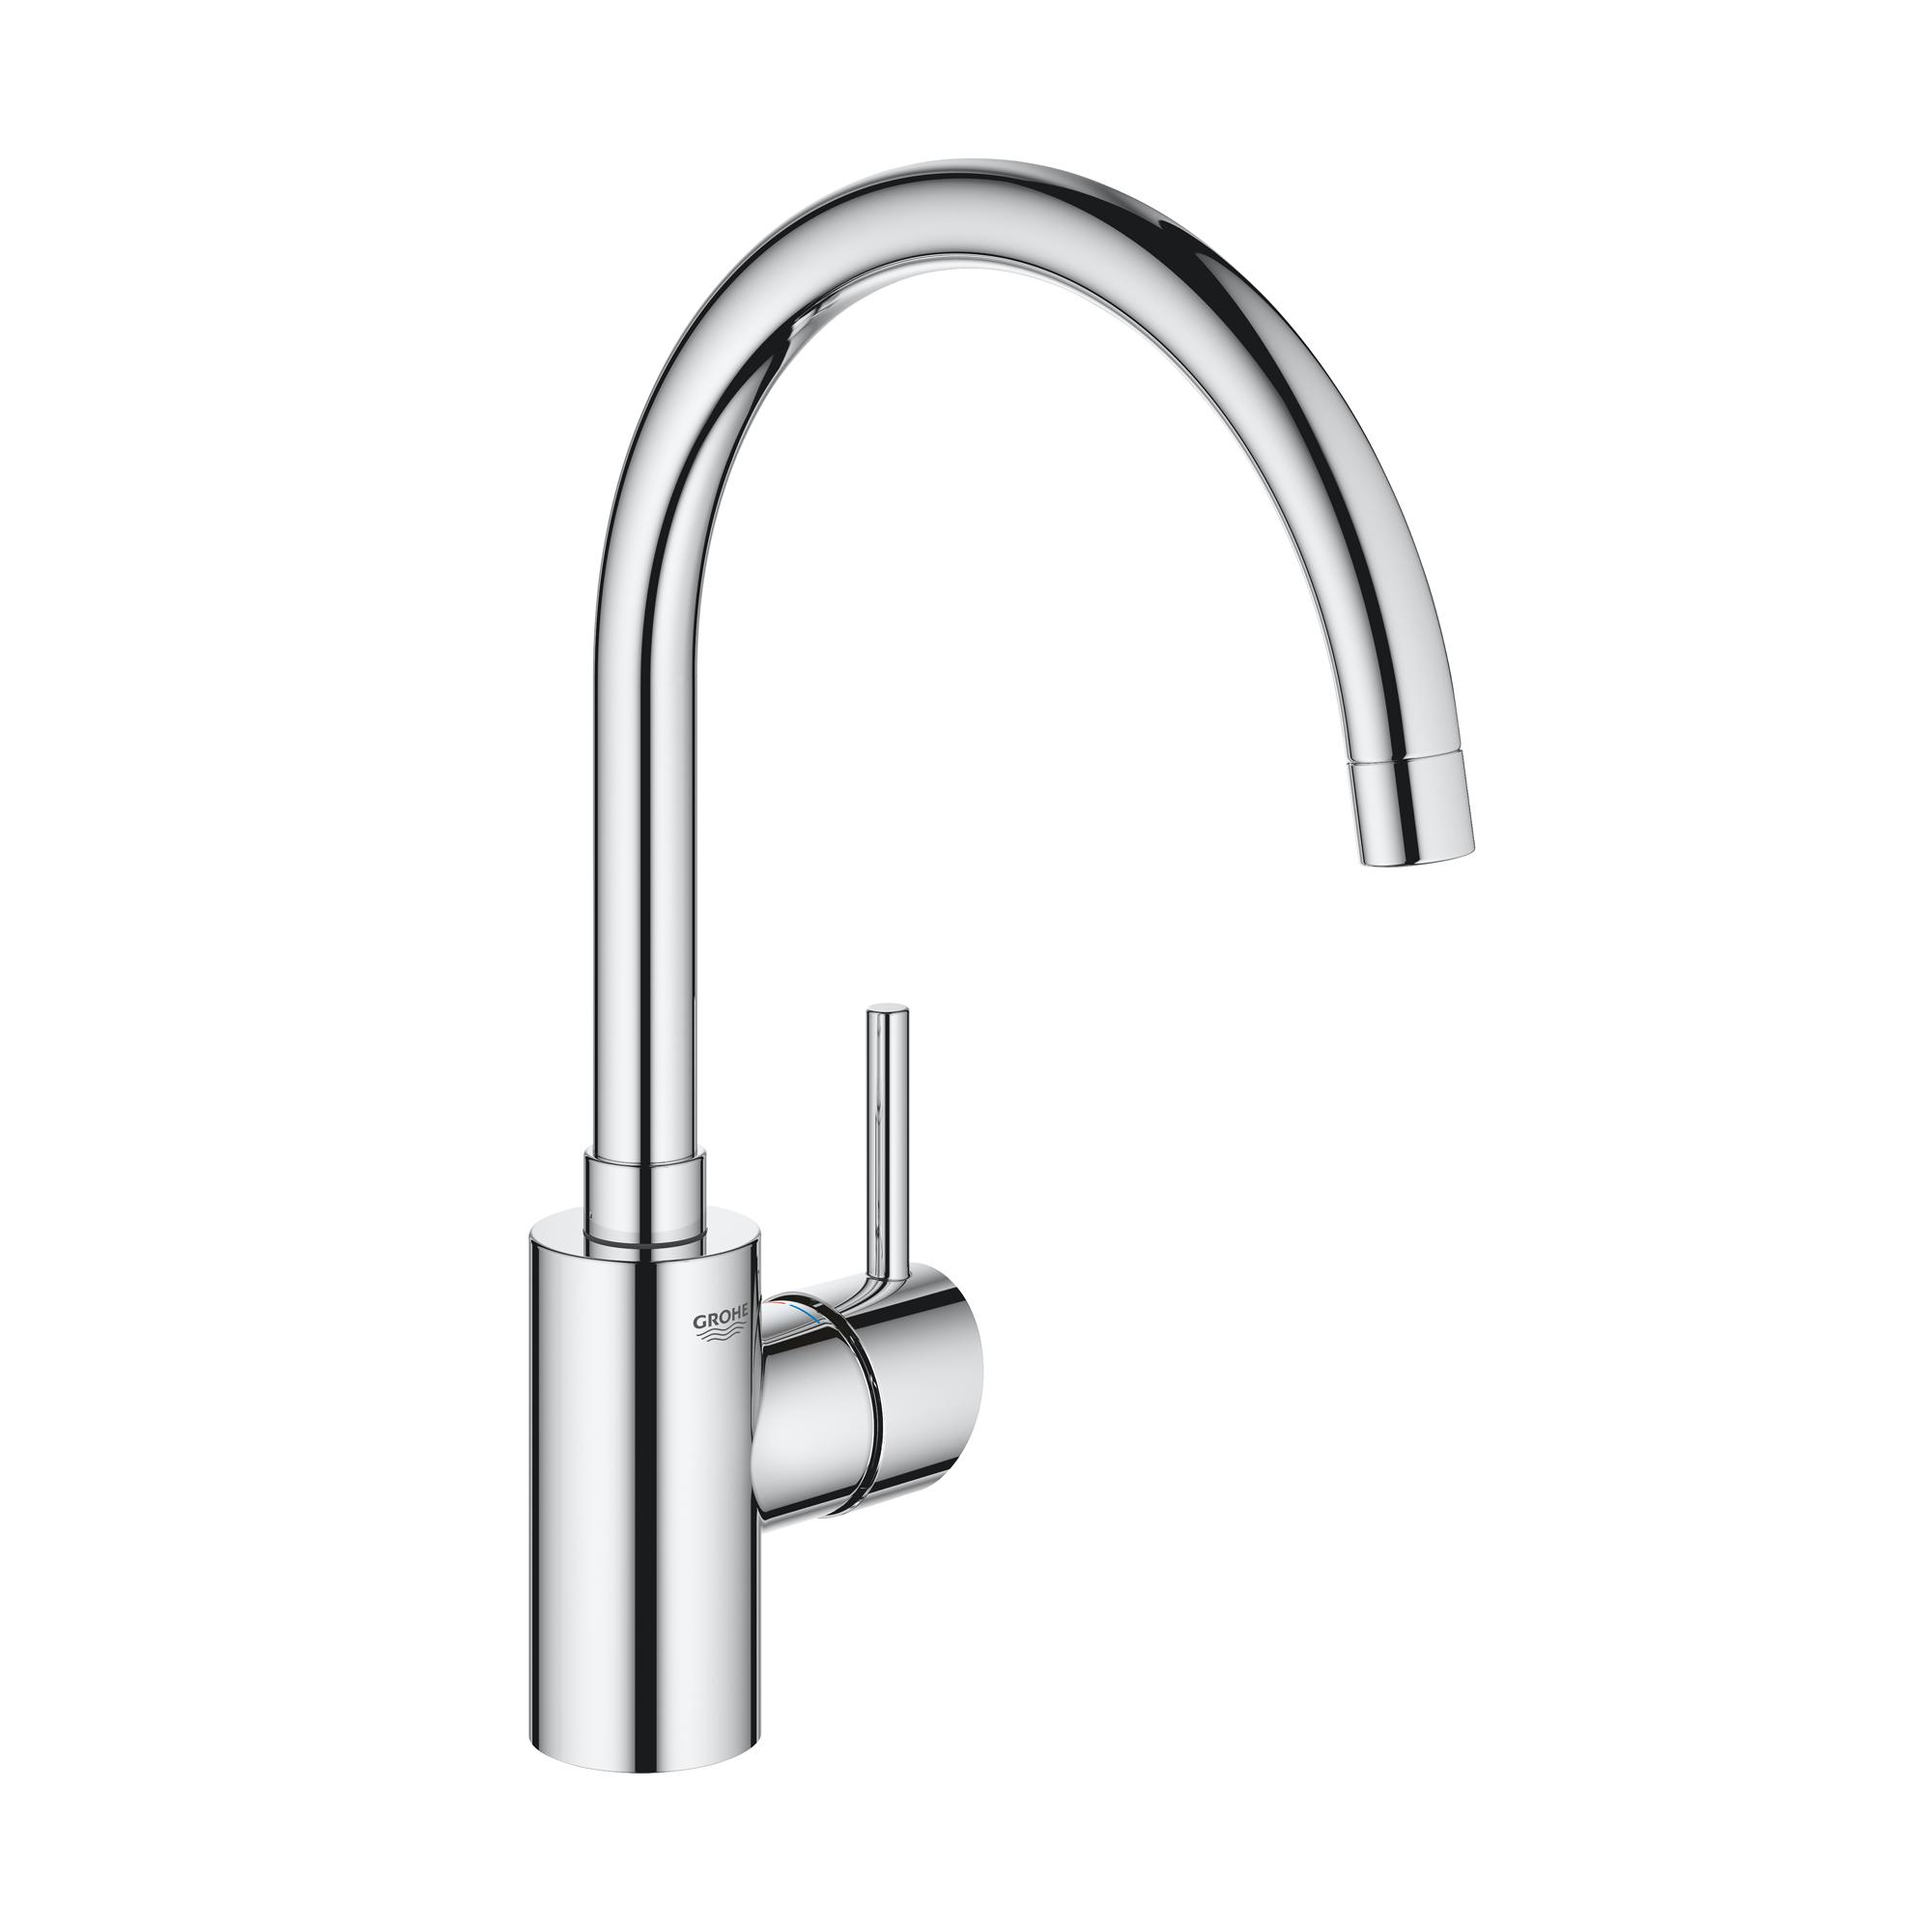 Grohe Concetto kitchen Single-Lever Sink Mixer Tap Spout Wivel 32661003 